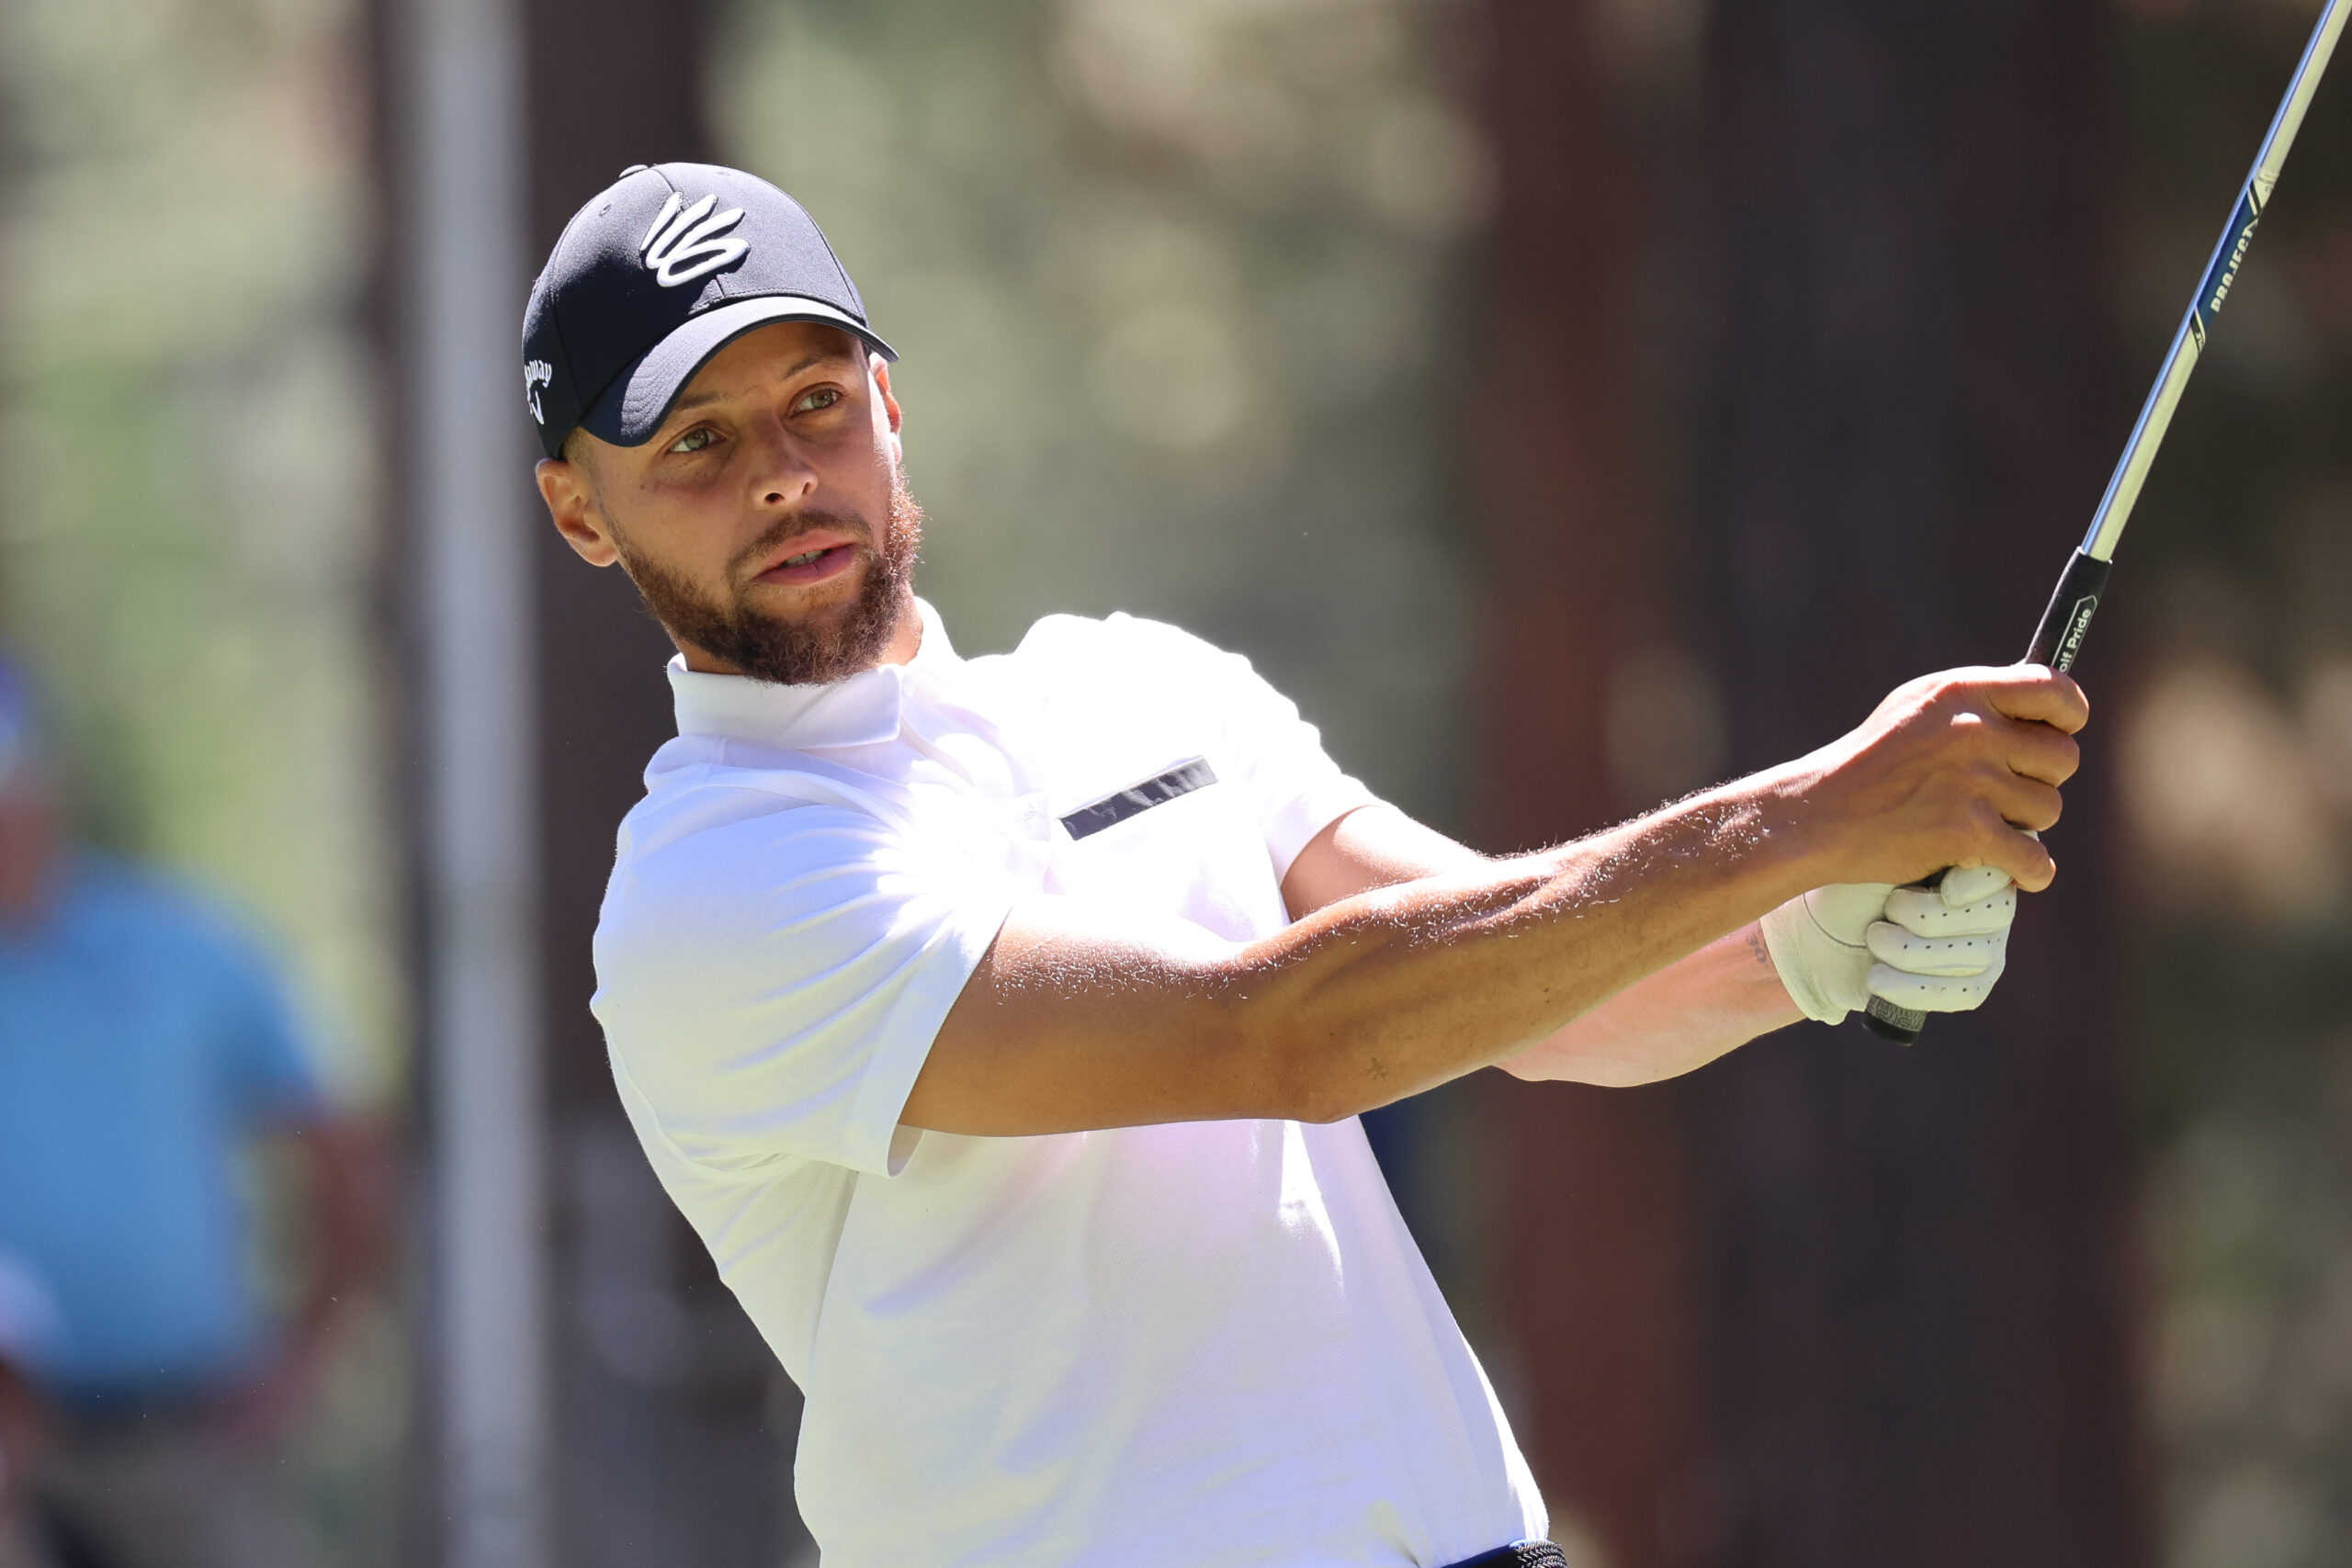 Steph Curry Hits Hole-In-One At American Century Championship: “That Was Nuts”